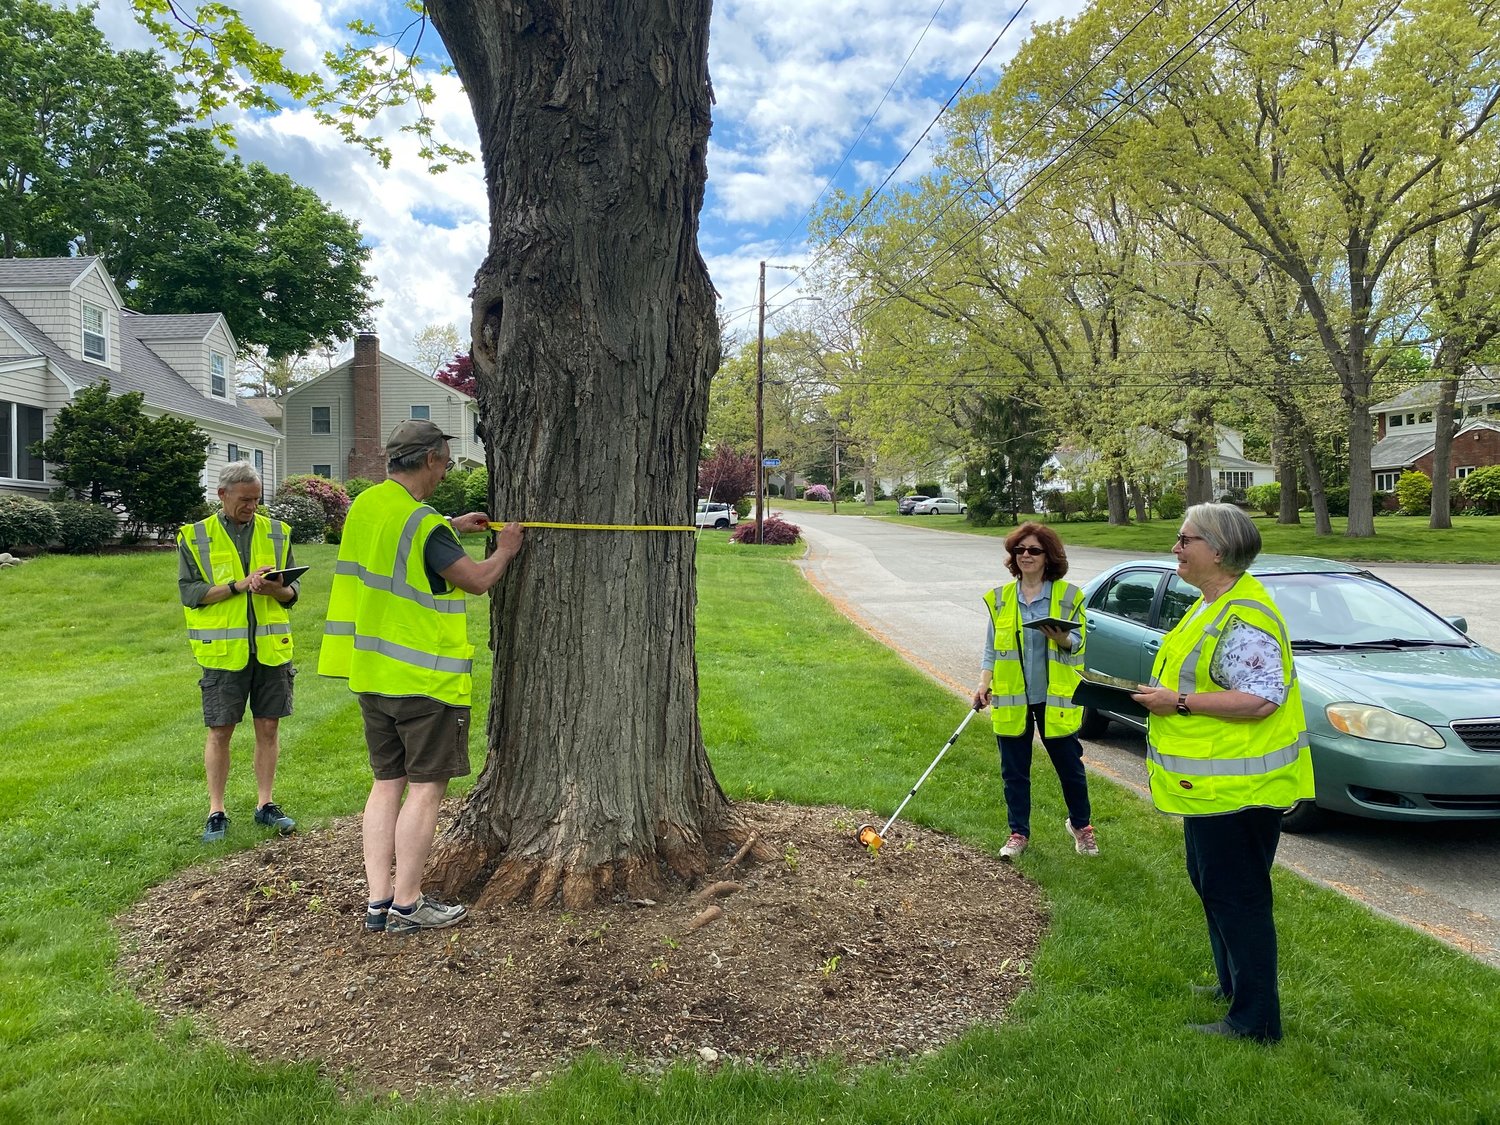 Volunteers are needed to help create a tree inventory in Barrington.